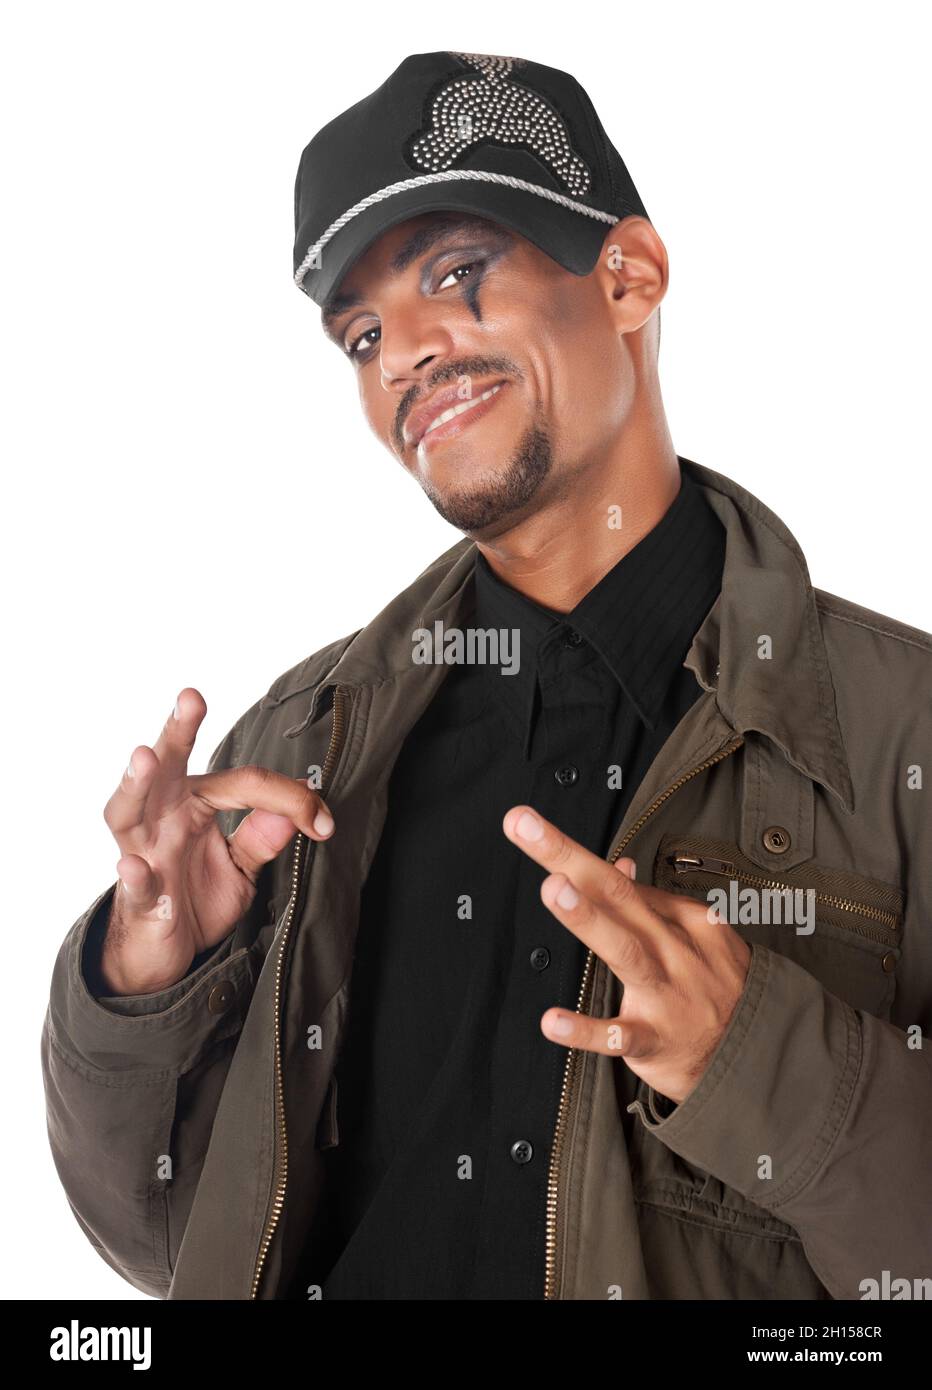 African musician singer with casual modern clothing and a cap wearing makeup, rock Stock Photo